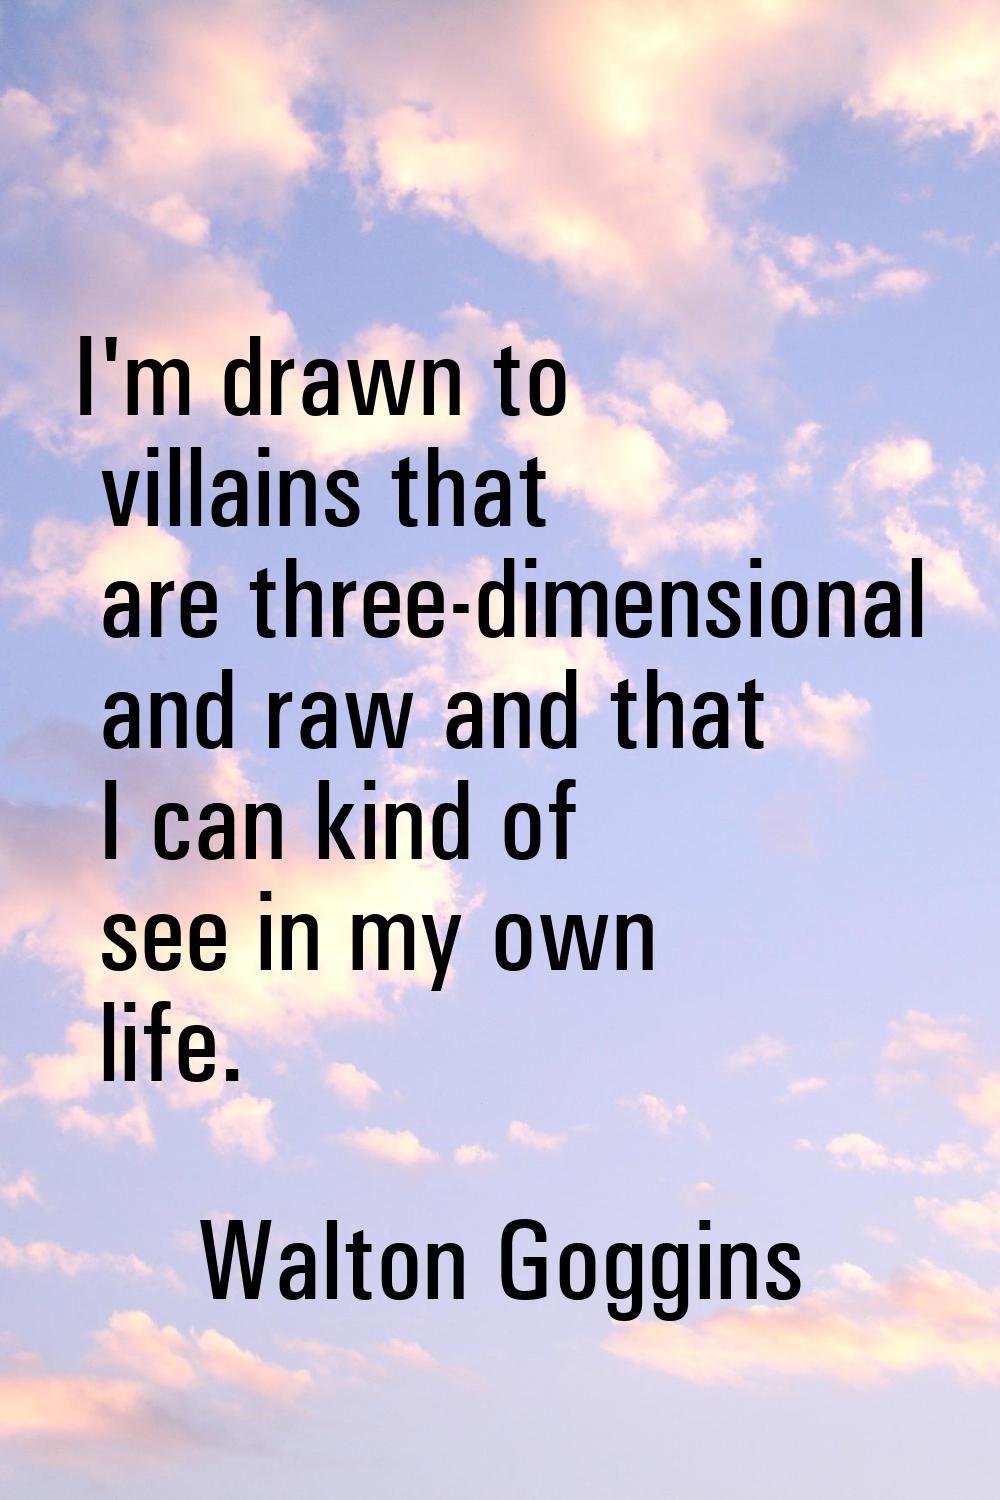 I'm drawn to villains that are three-dimensional and raw and that I can kind of see in my own life.